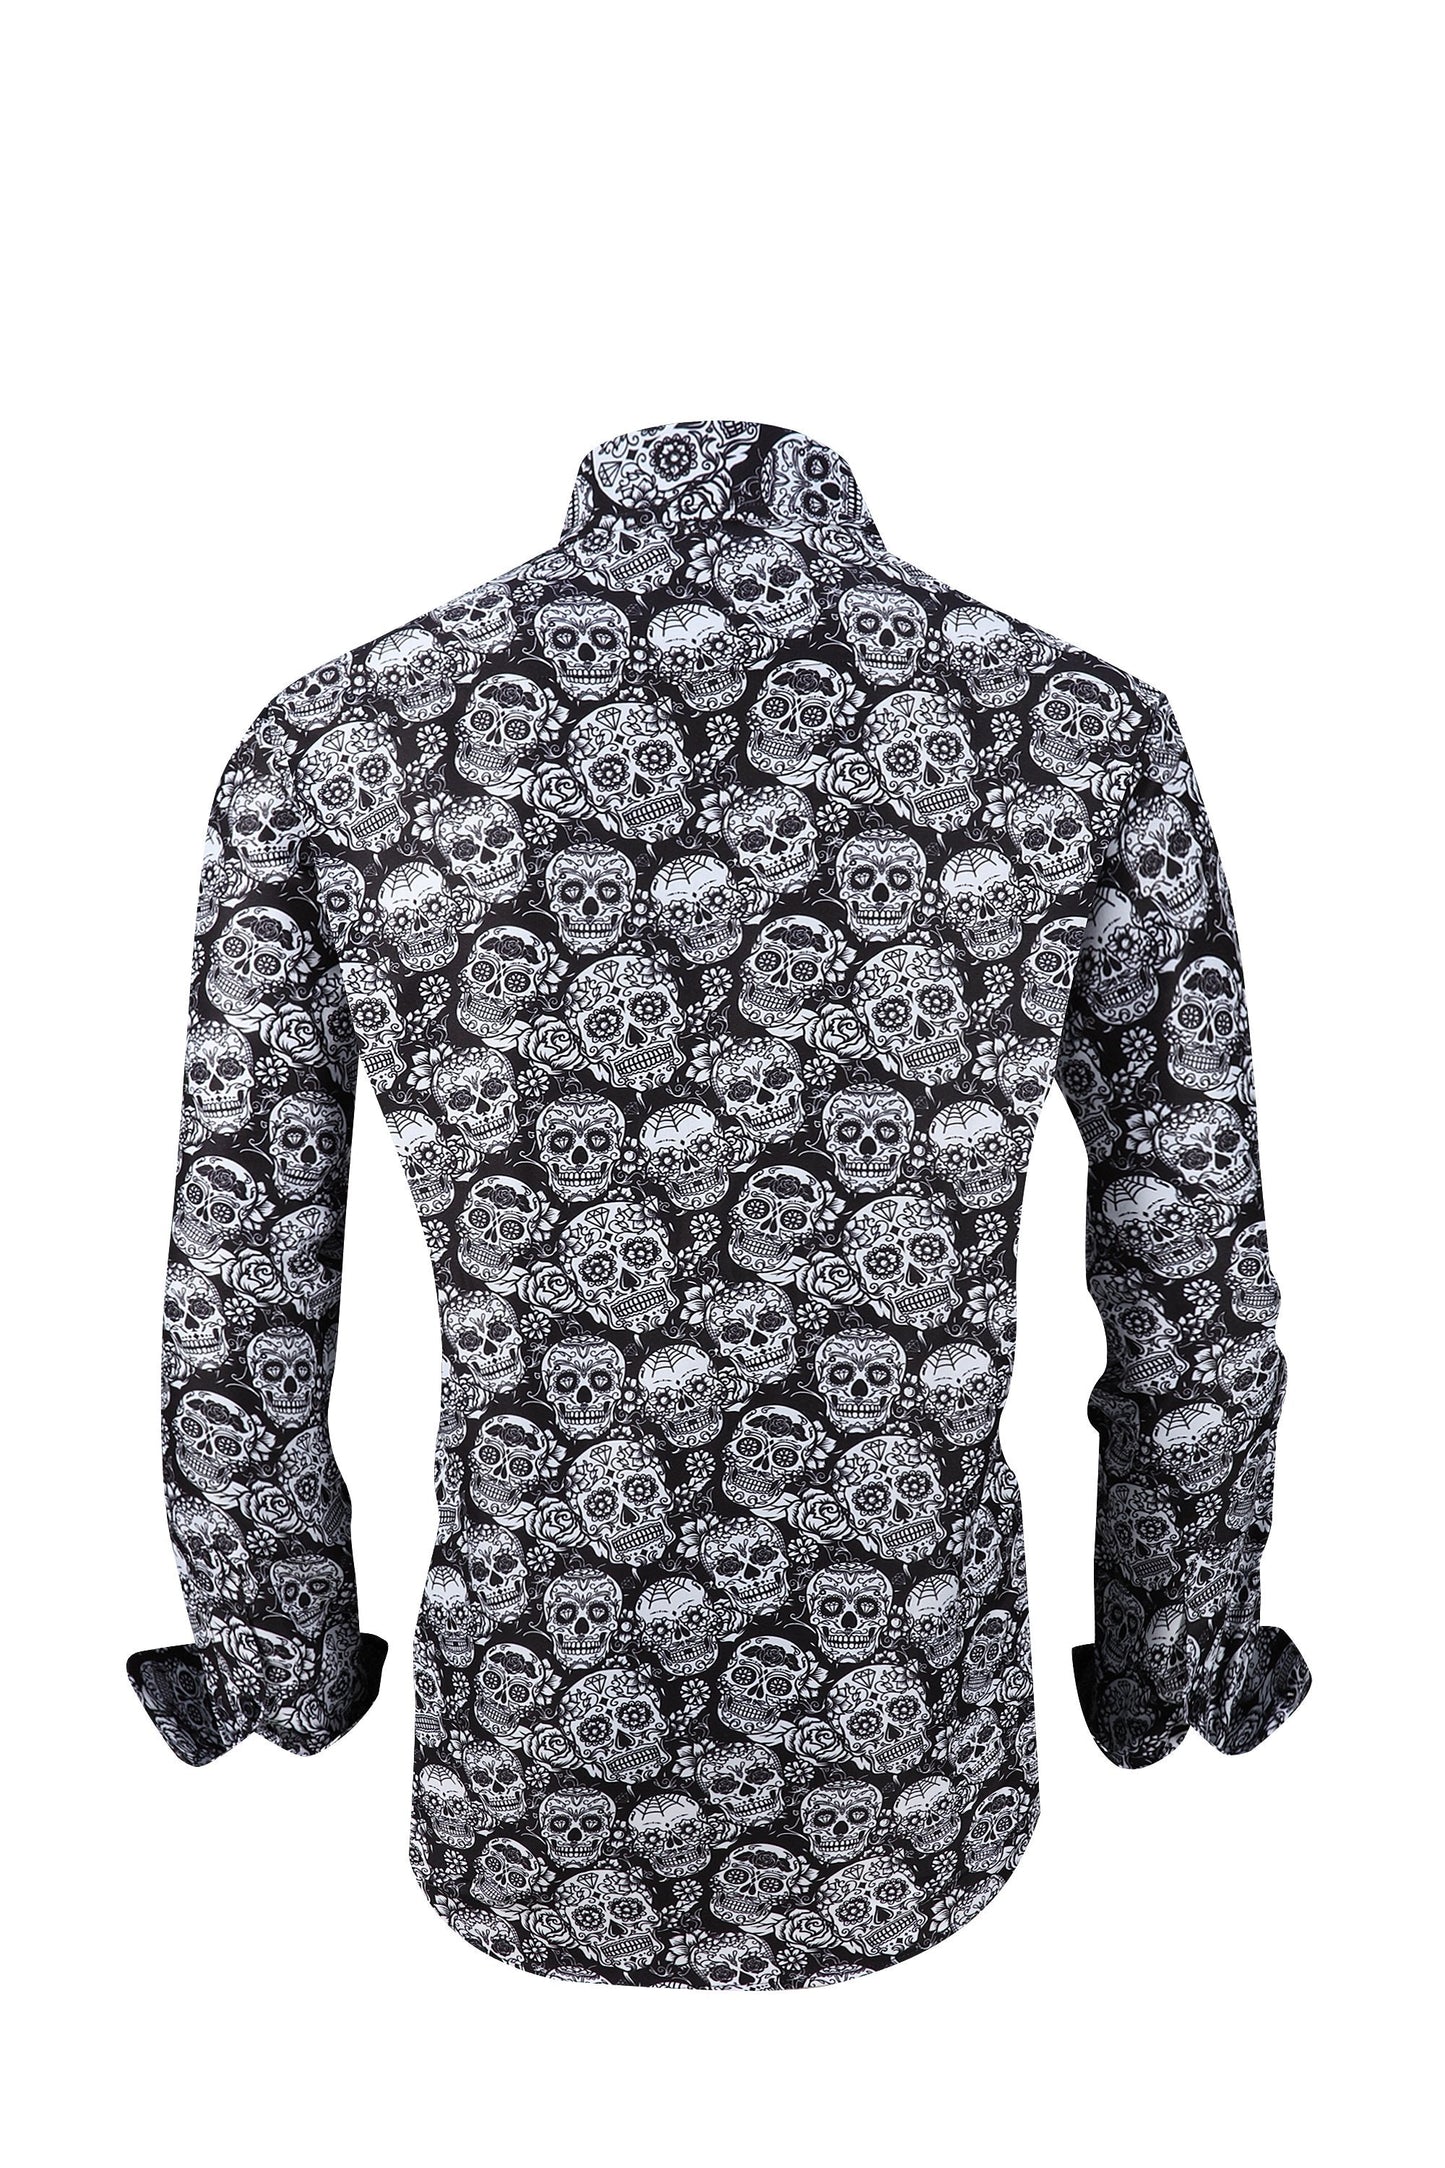 Mens PREMIERE Long Sleeve Button Down Dress Shirt Black White Abstract Skull